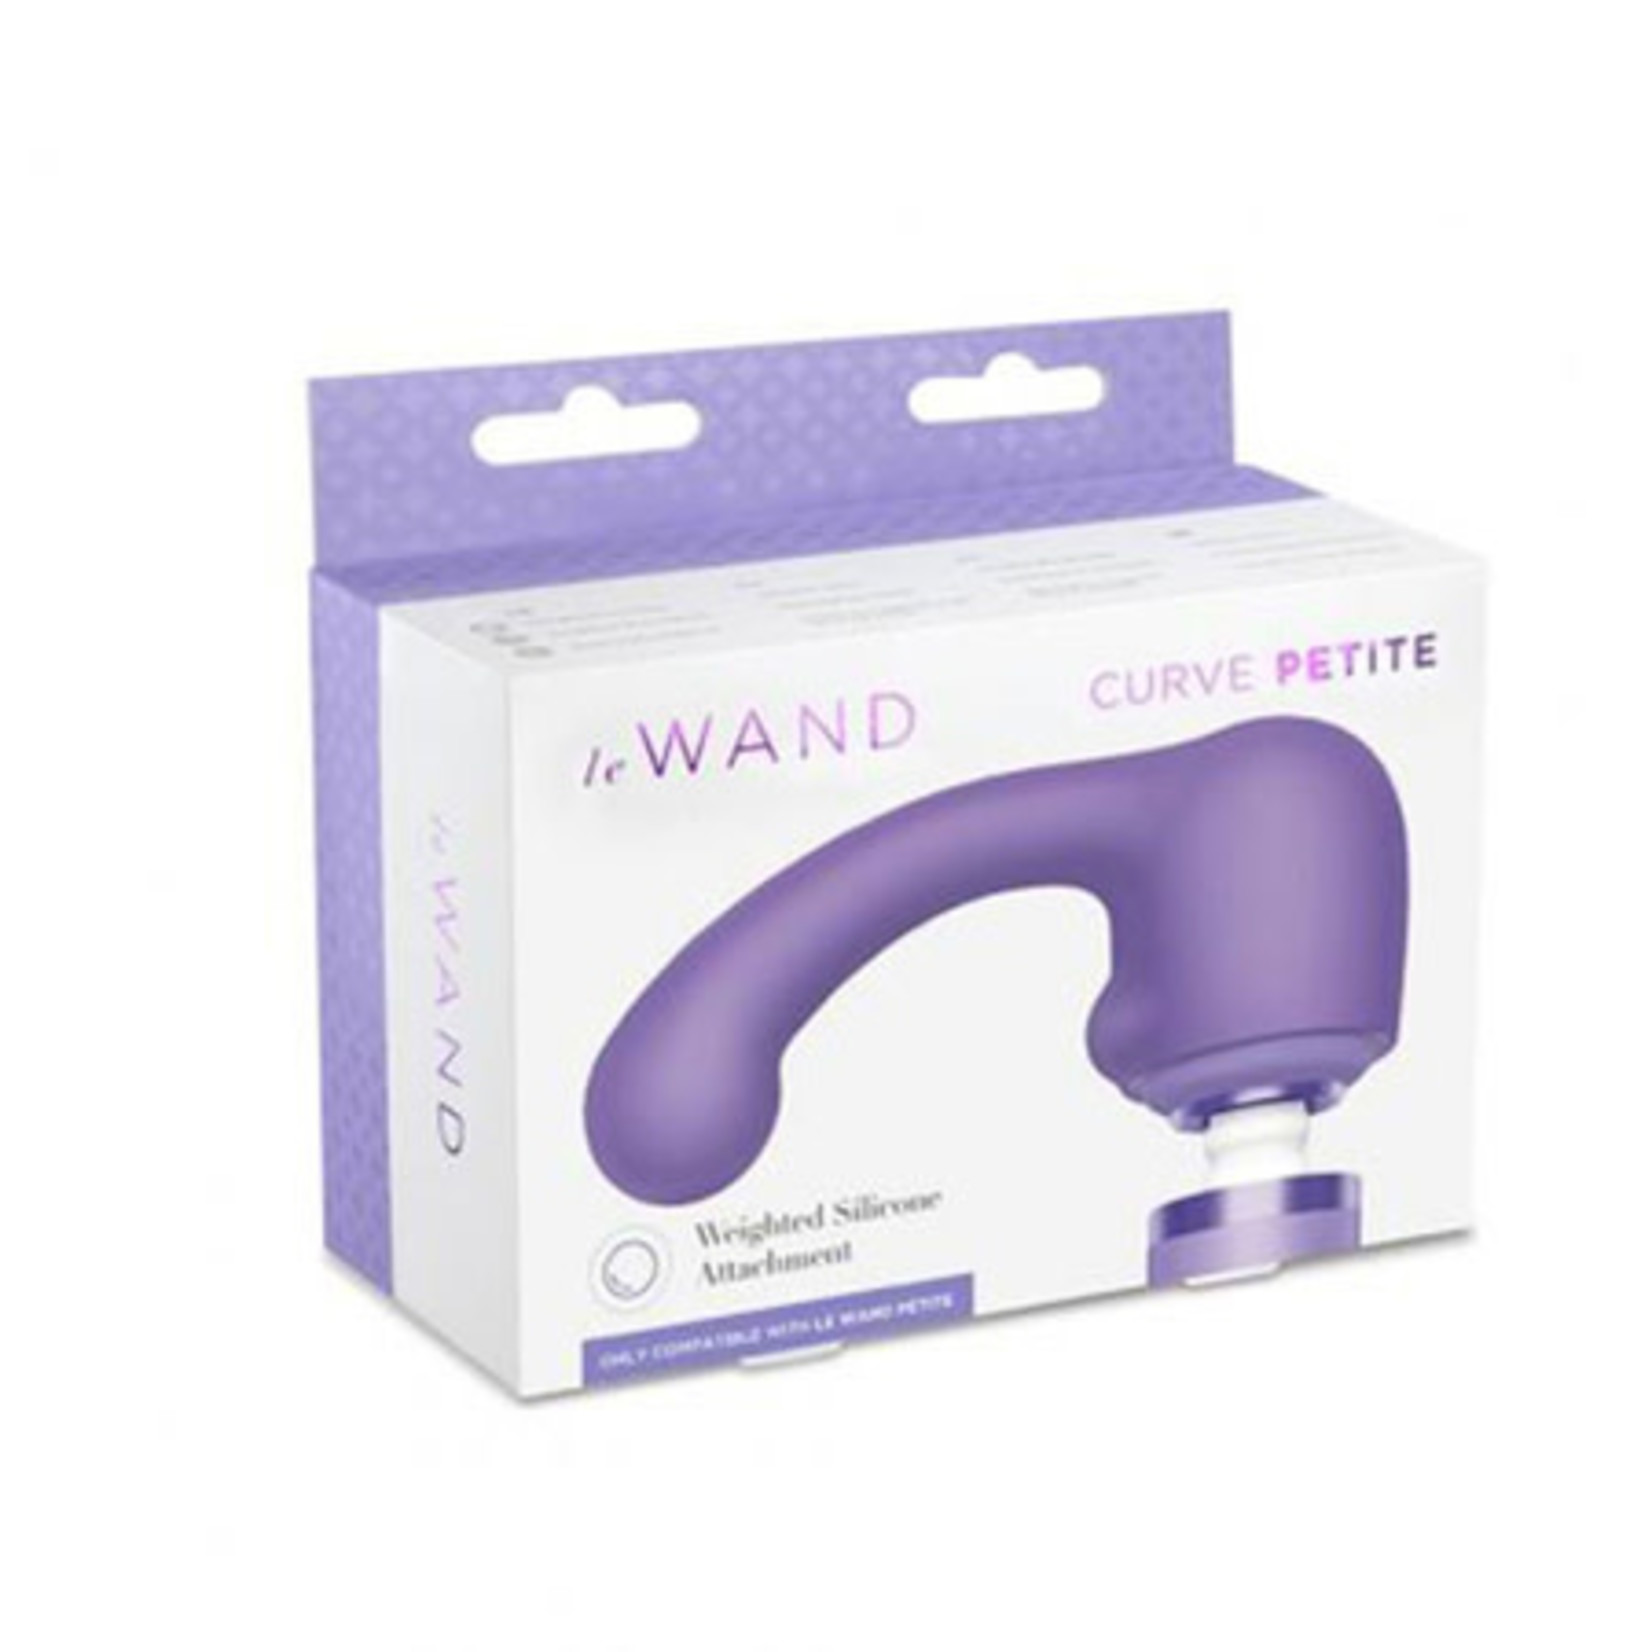 Le Wand Petite Curve Weighted Silicone Atachment